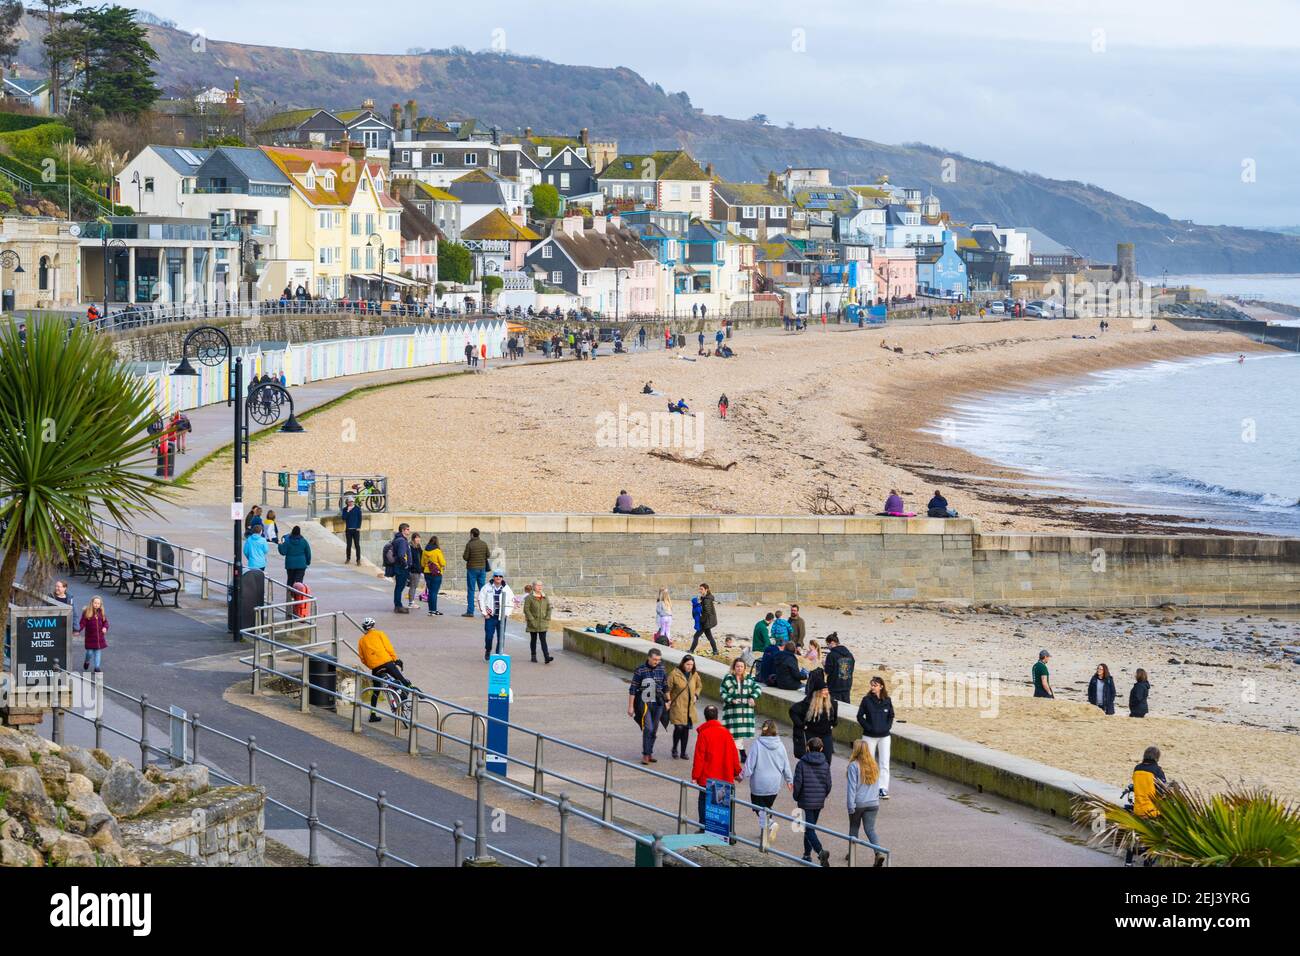 Lyme Regis, Dorset, UK. 21st Feb, 2021. UK Weather: People enjoy a warm and sunny Sunday afternoon on the beach at the seaside resort of Lyme Regis as the recent wet and gloomy weather clears bringing warmer, sunnier conditions next week. Credit: Celia McMahon/Alamy Live News Stock Photo